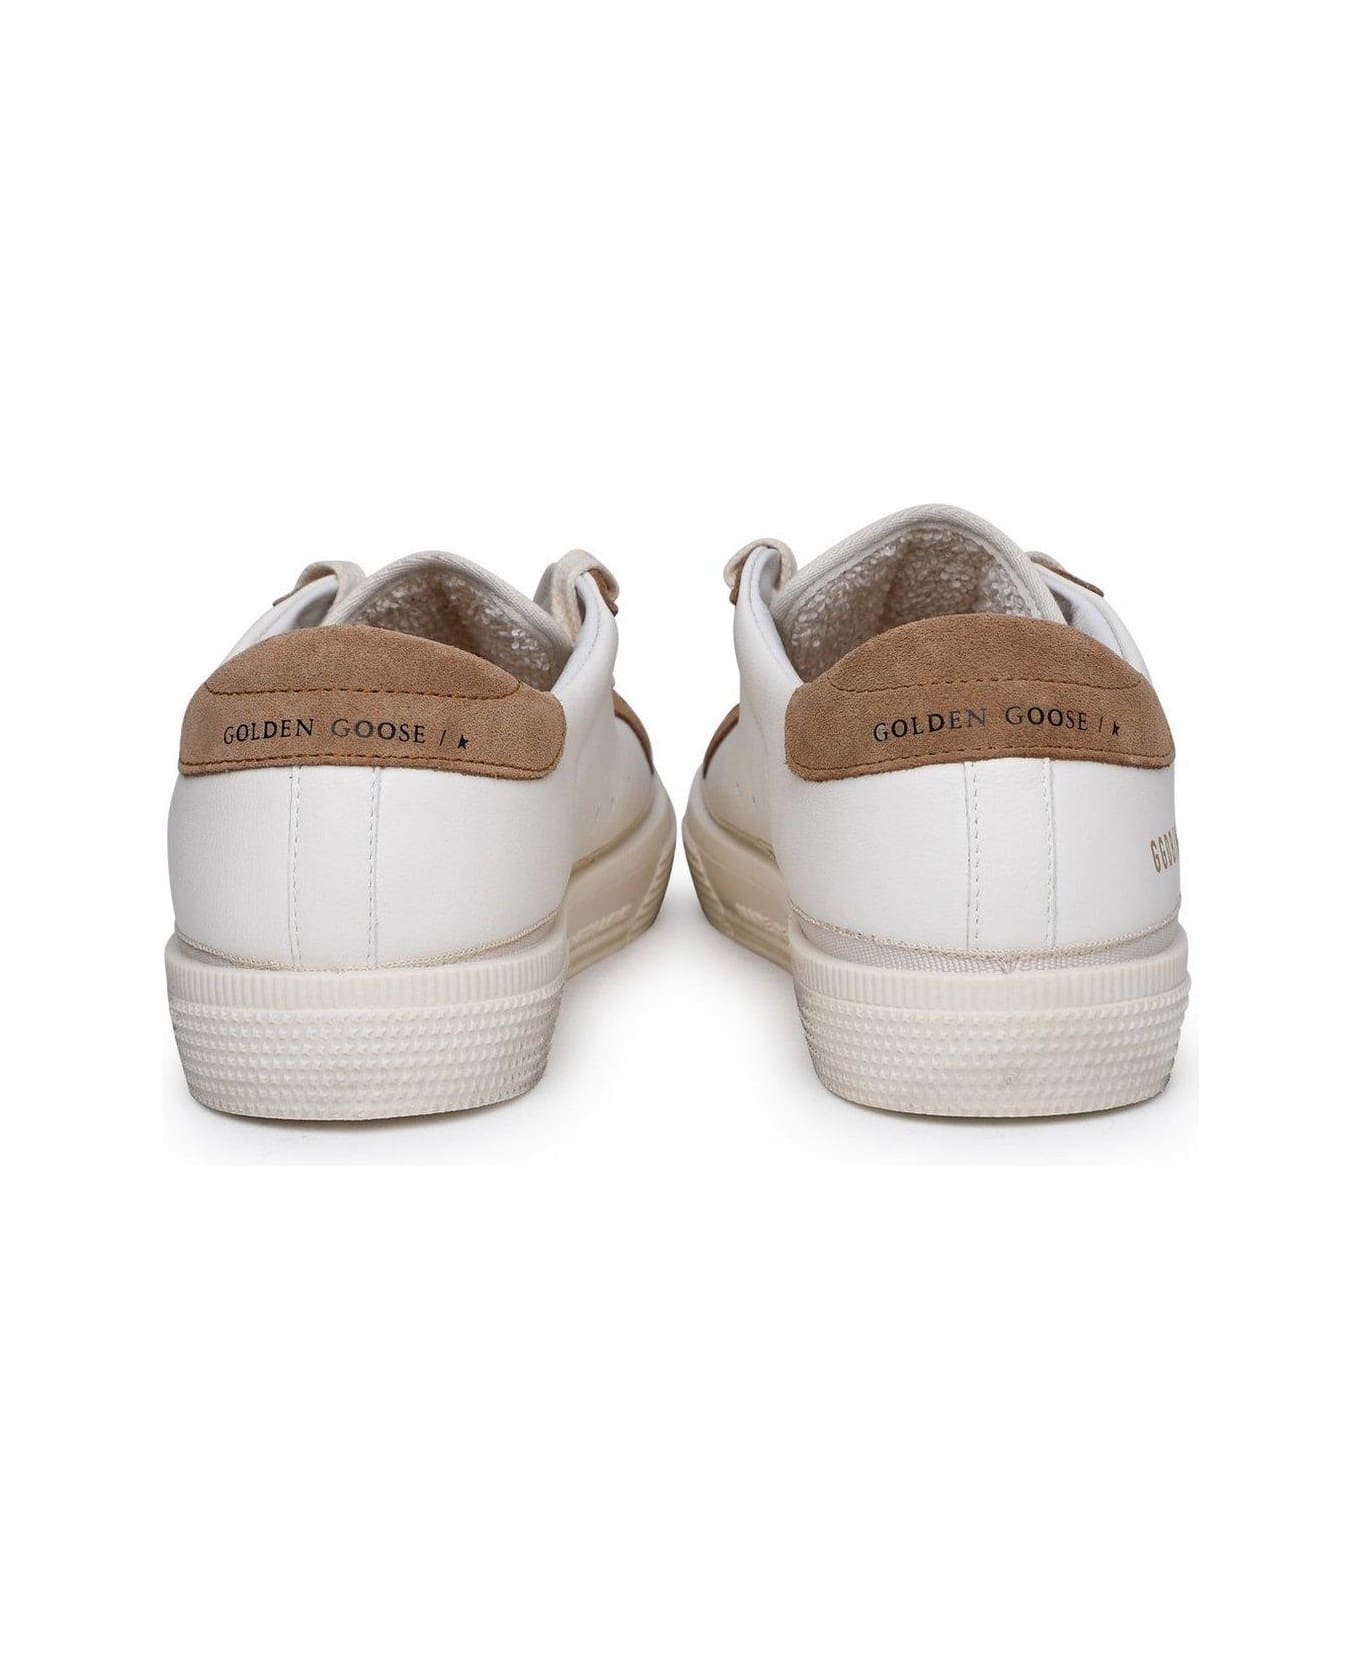 Golden Goose May Star Distressed-effect Low-top Sneakers - White/Light Brown シューズ